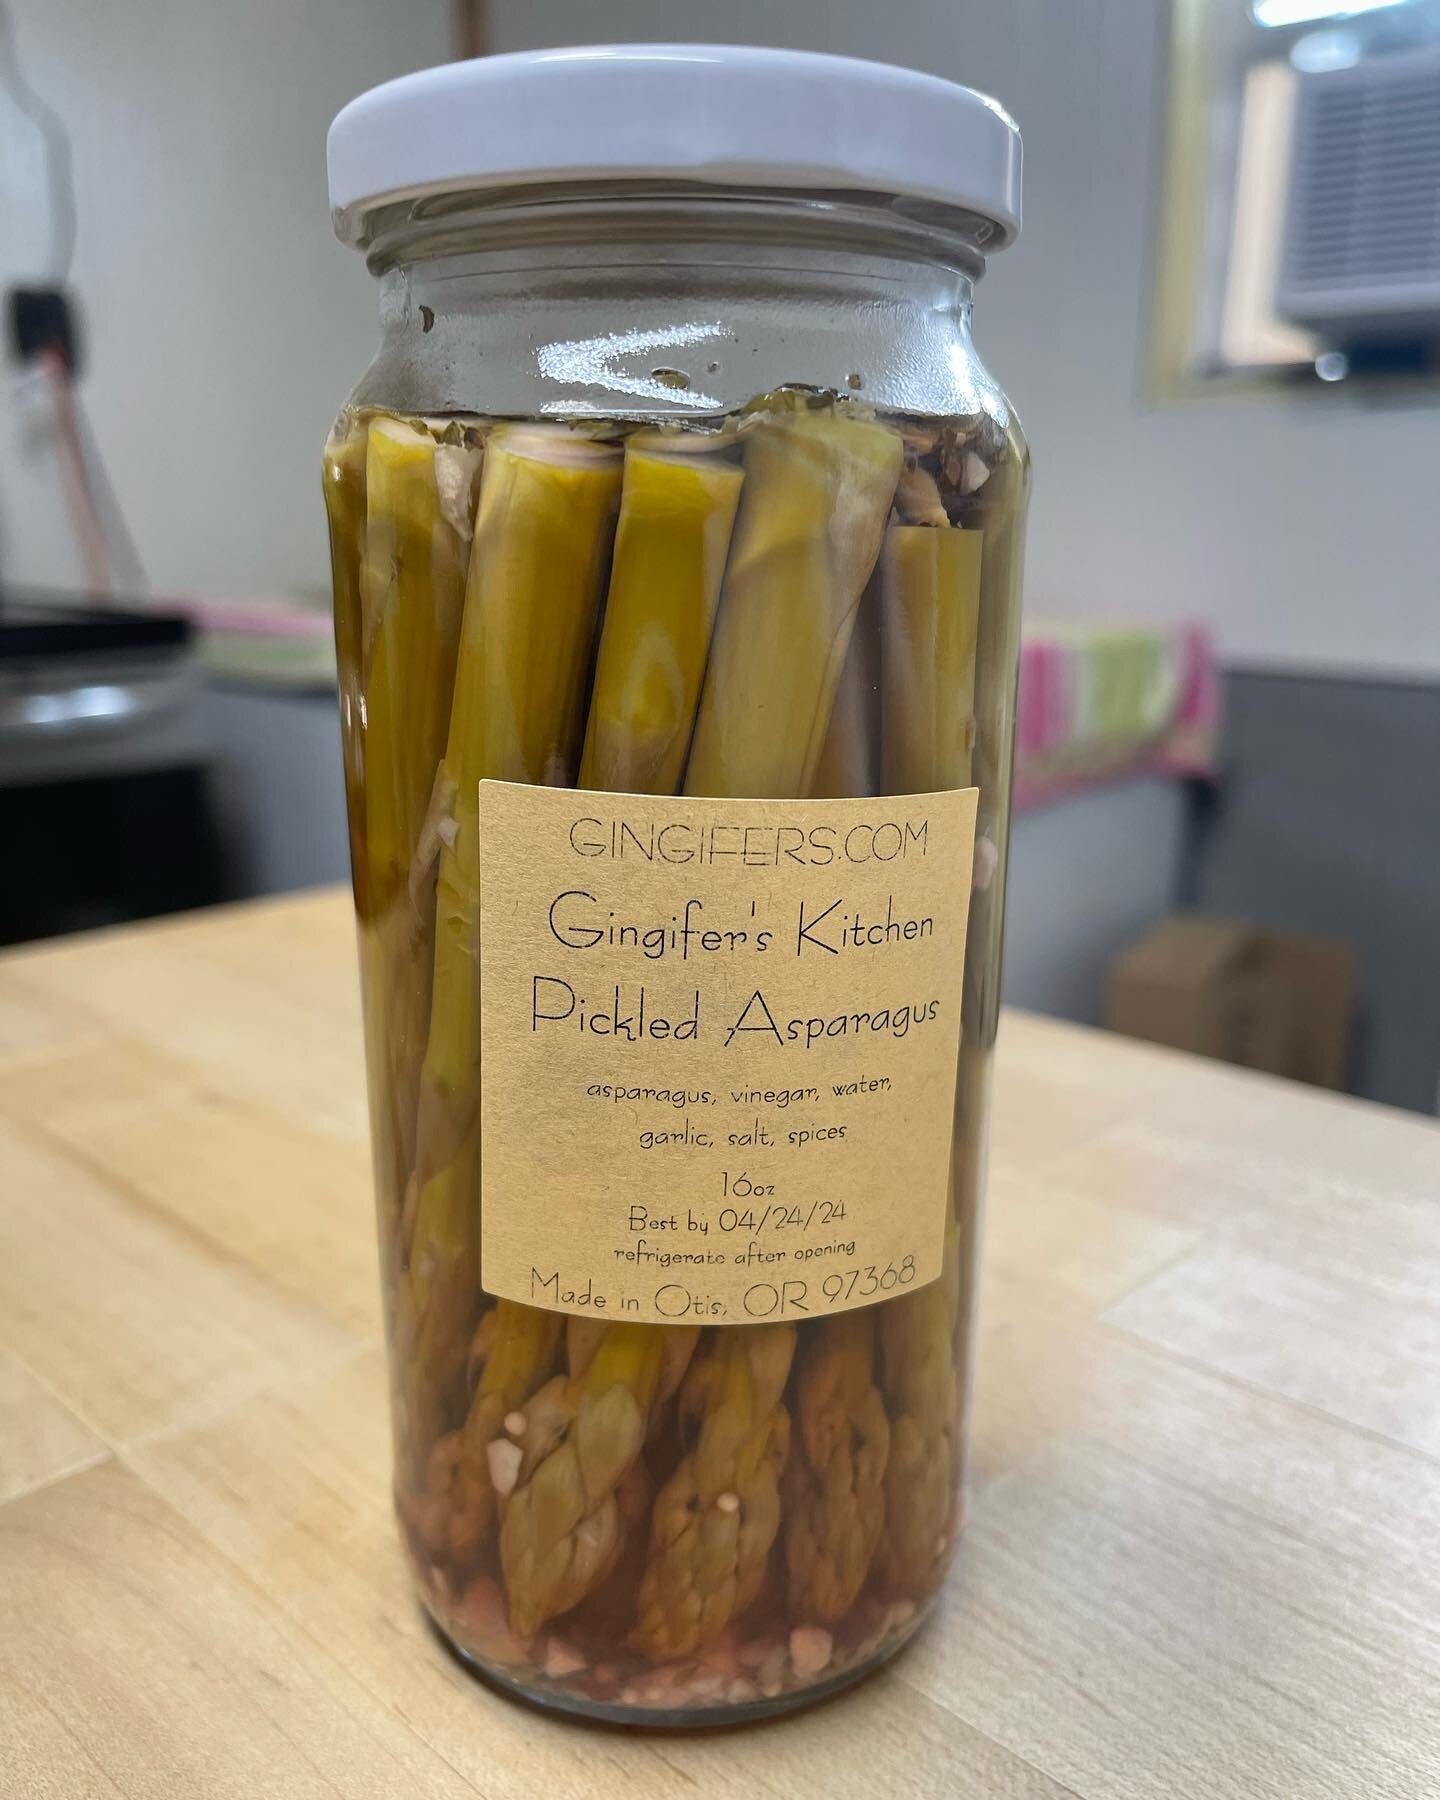 Pickled asparagus is back!  We will be at @newportoregonfarmersmarket from 9-1 and at @salemcommunitymarkets from 9-2 in spot 37.
See you at the markets!